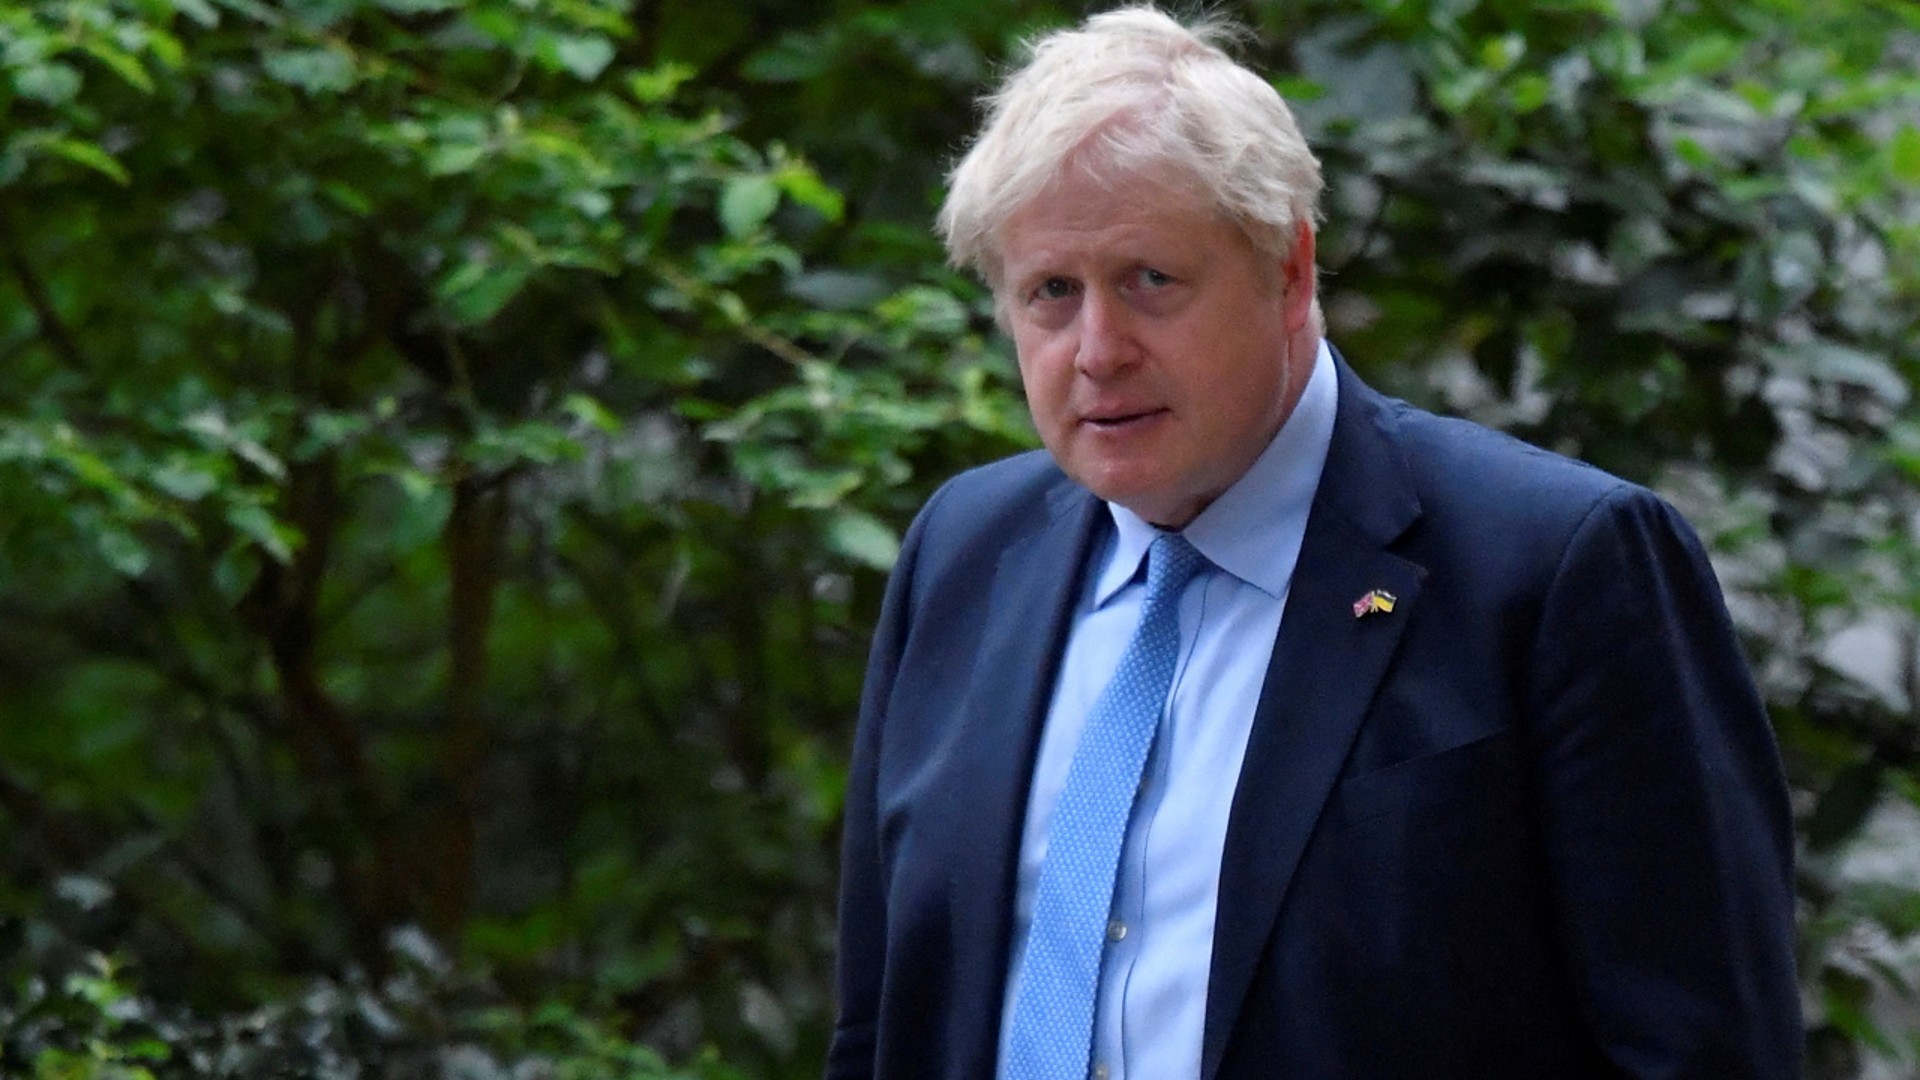 The resignation spiral that forced Johnson to leave